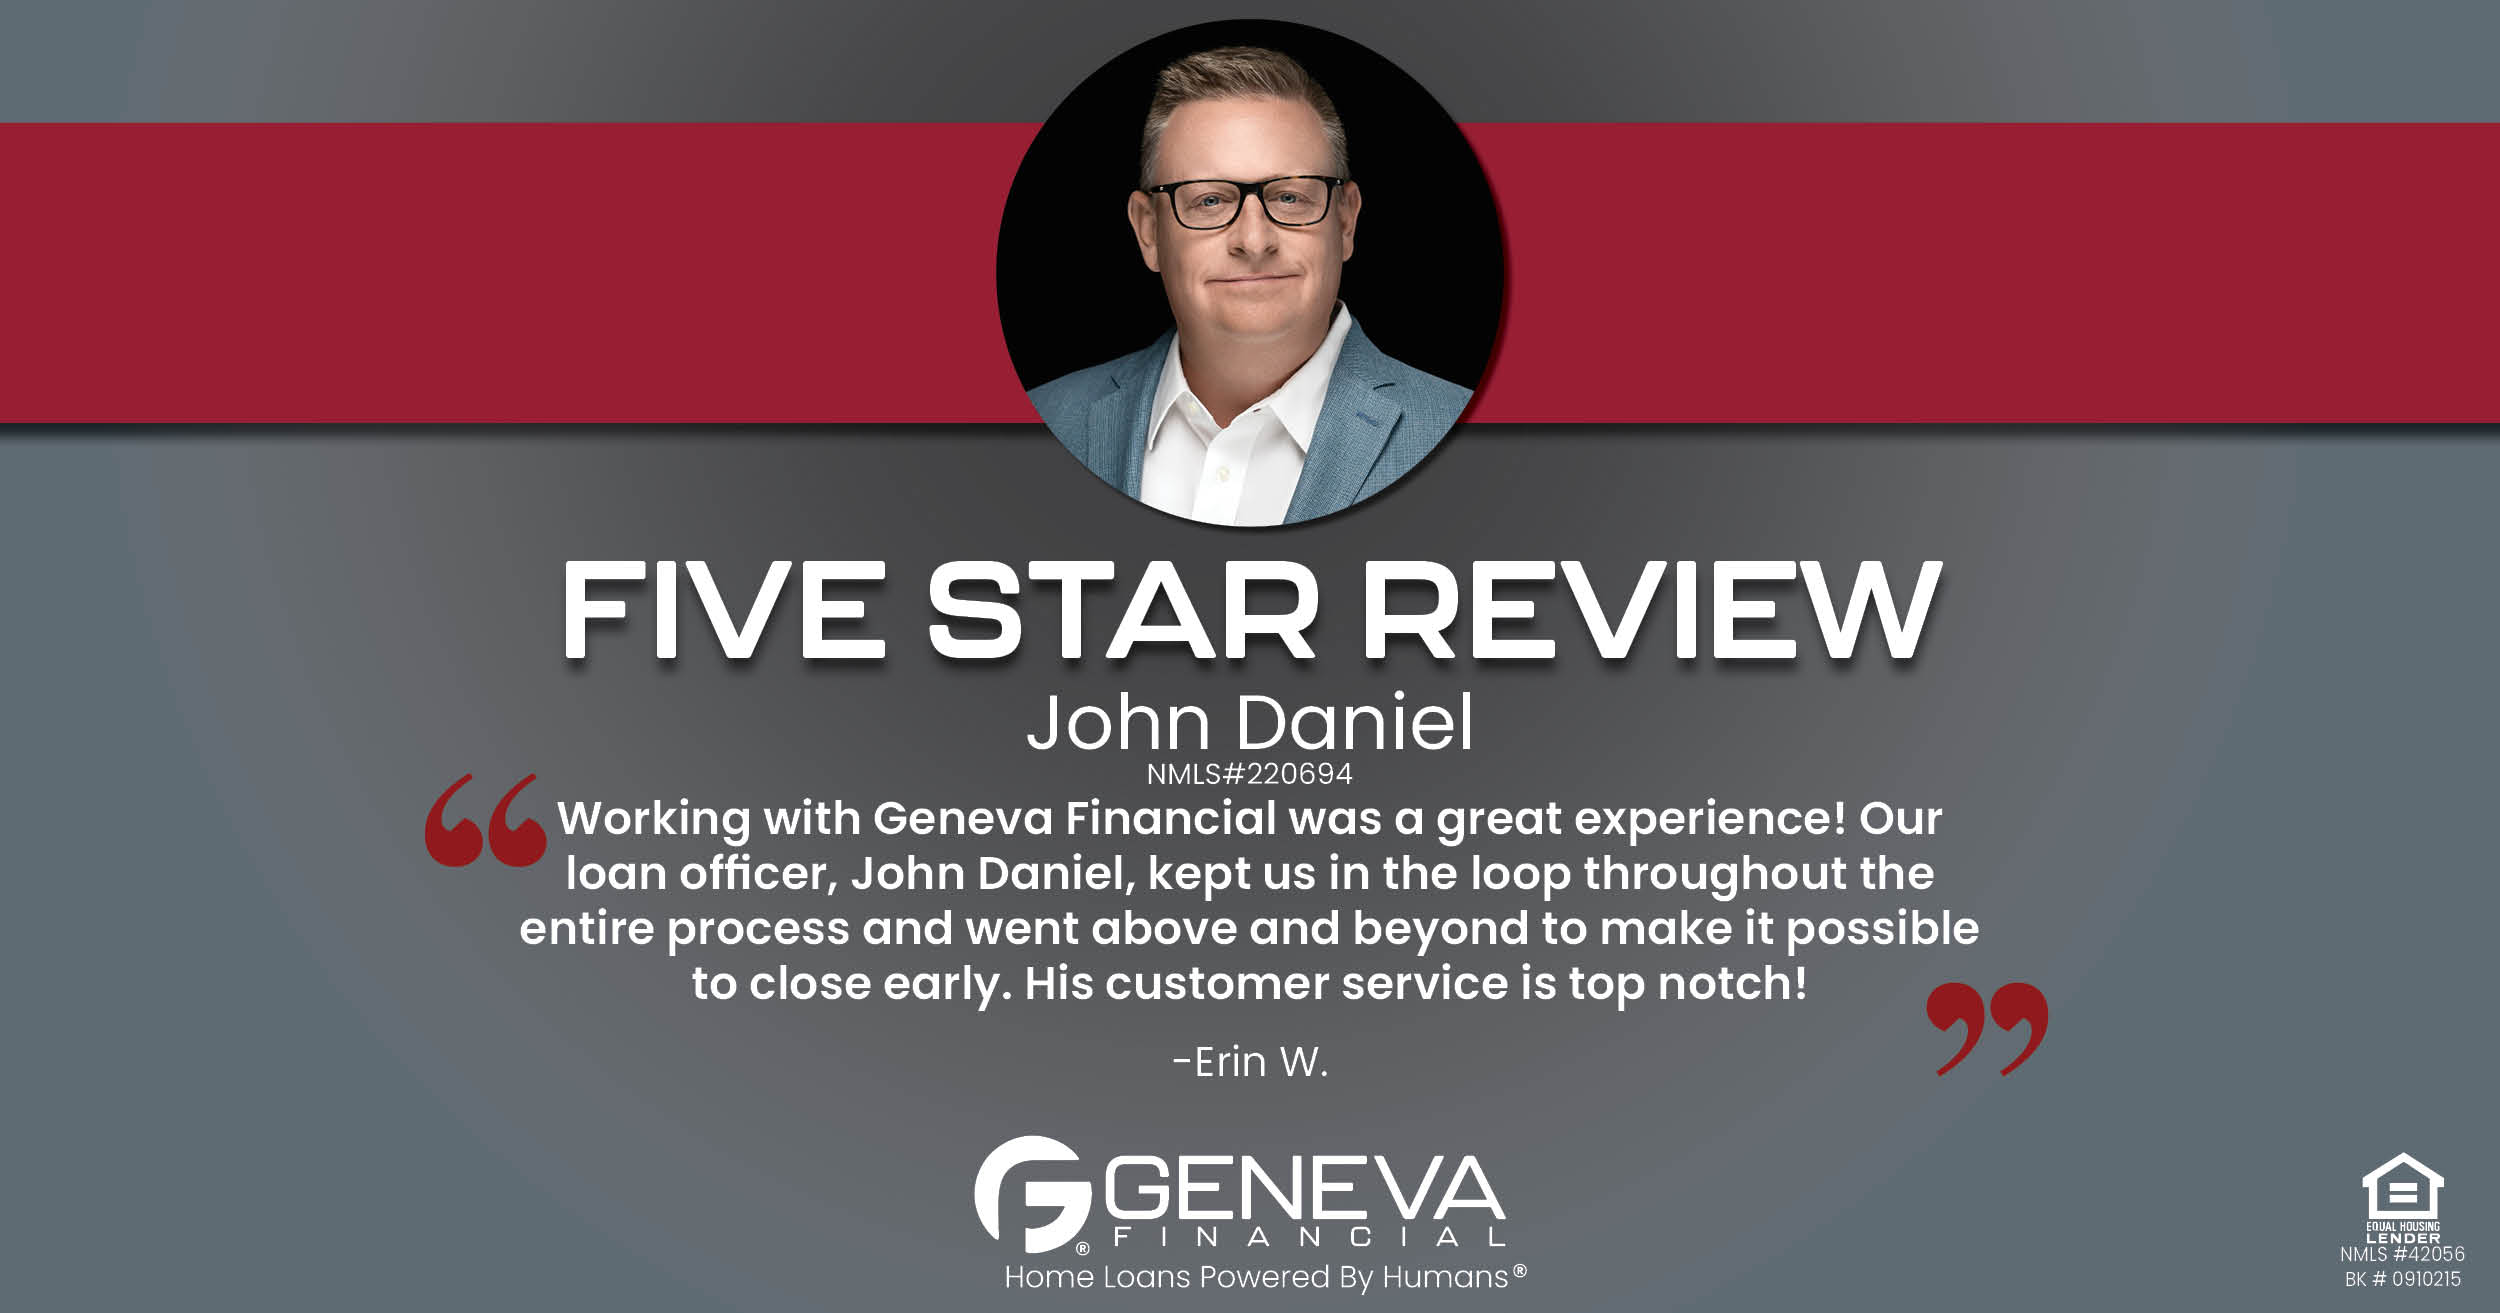 5 Star Review for John Daniel, Licensed Mortgage Loan Officer with Geneva Financial, St. Louis, MO – Home Loans Powered by Humans®.